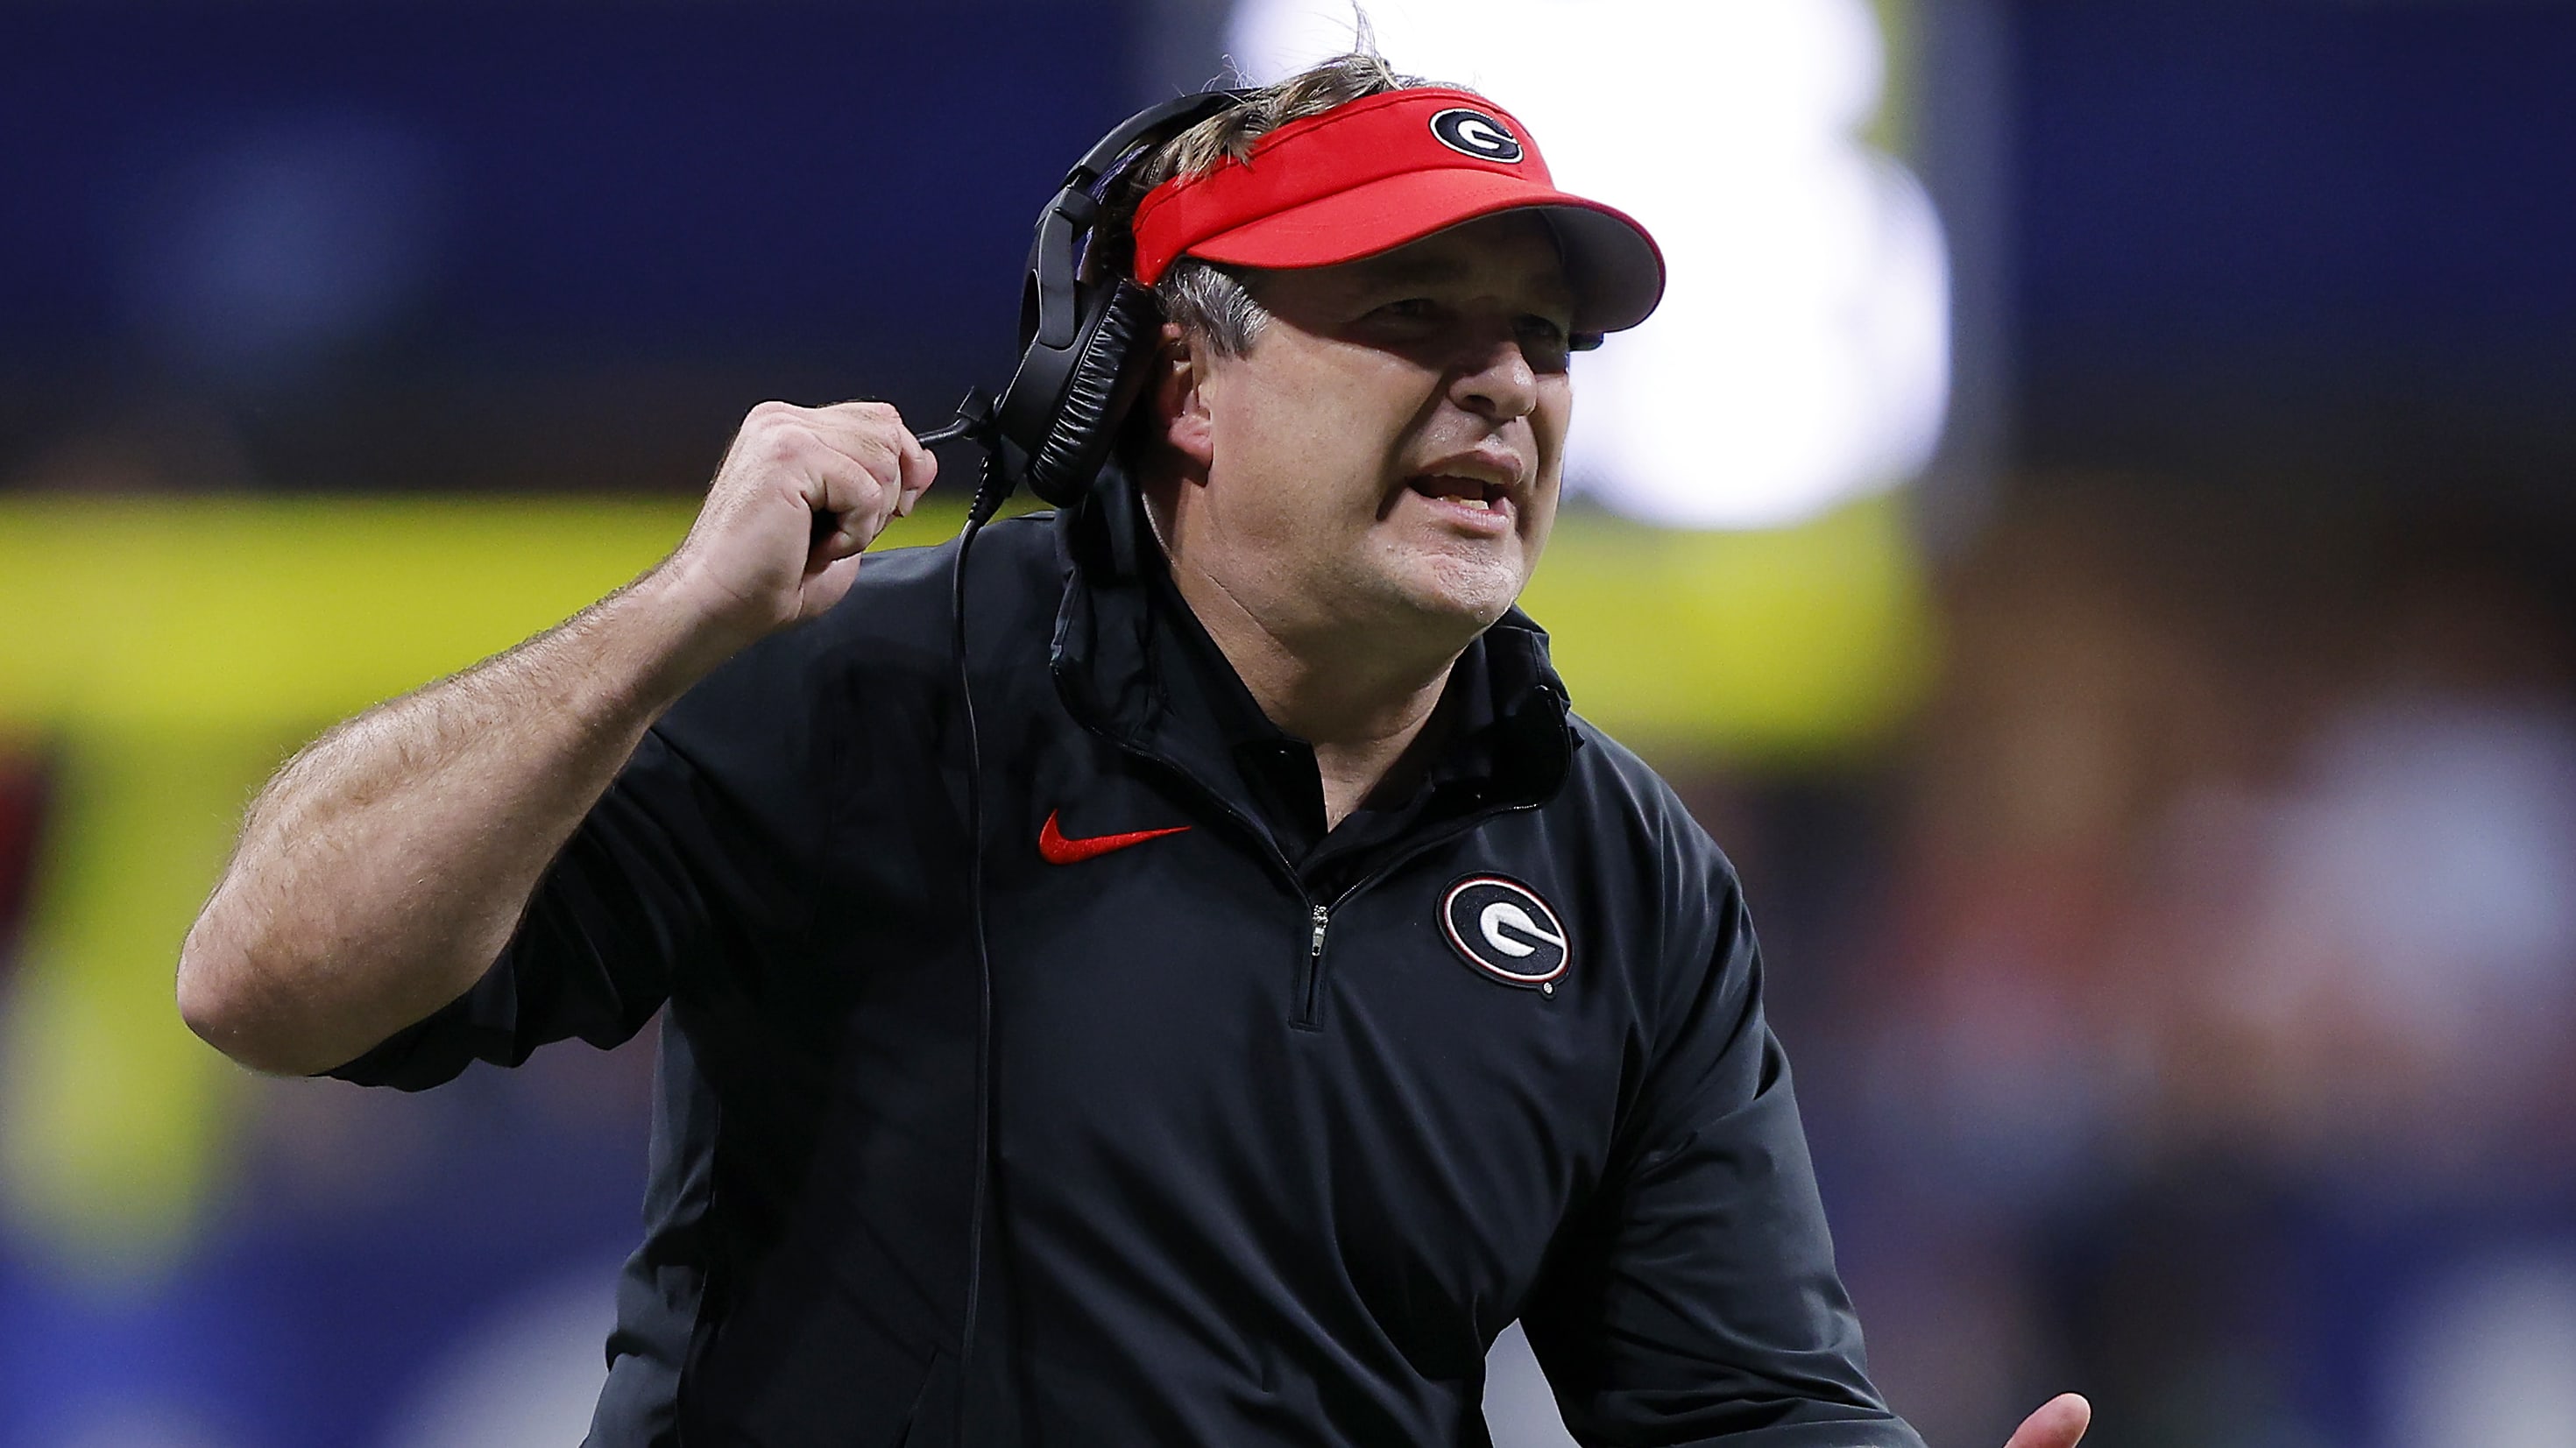 Georgia Bulldogs head coach Kirby Smart on the sideline during the SEC Championship Game.